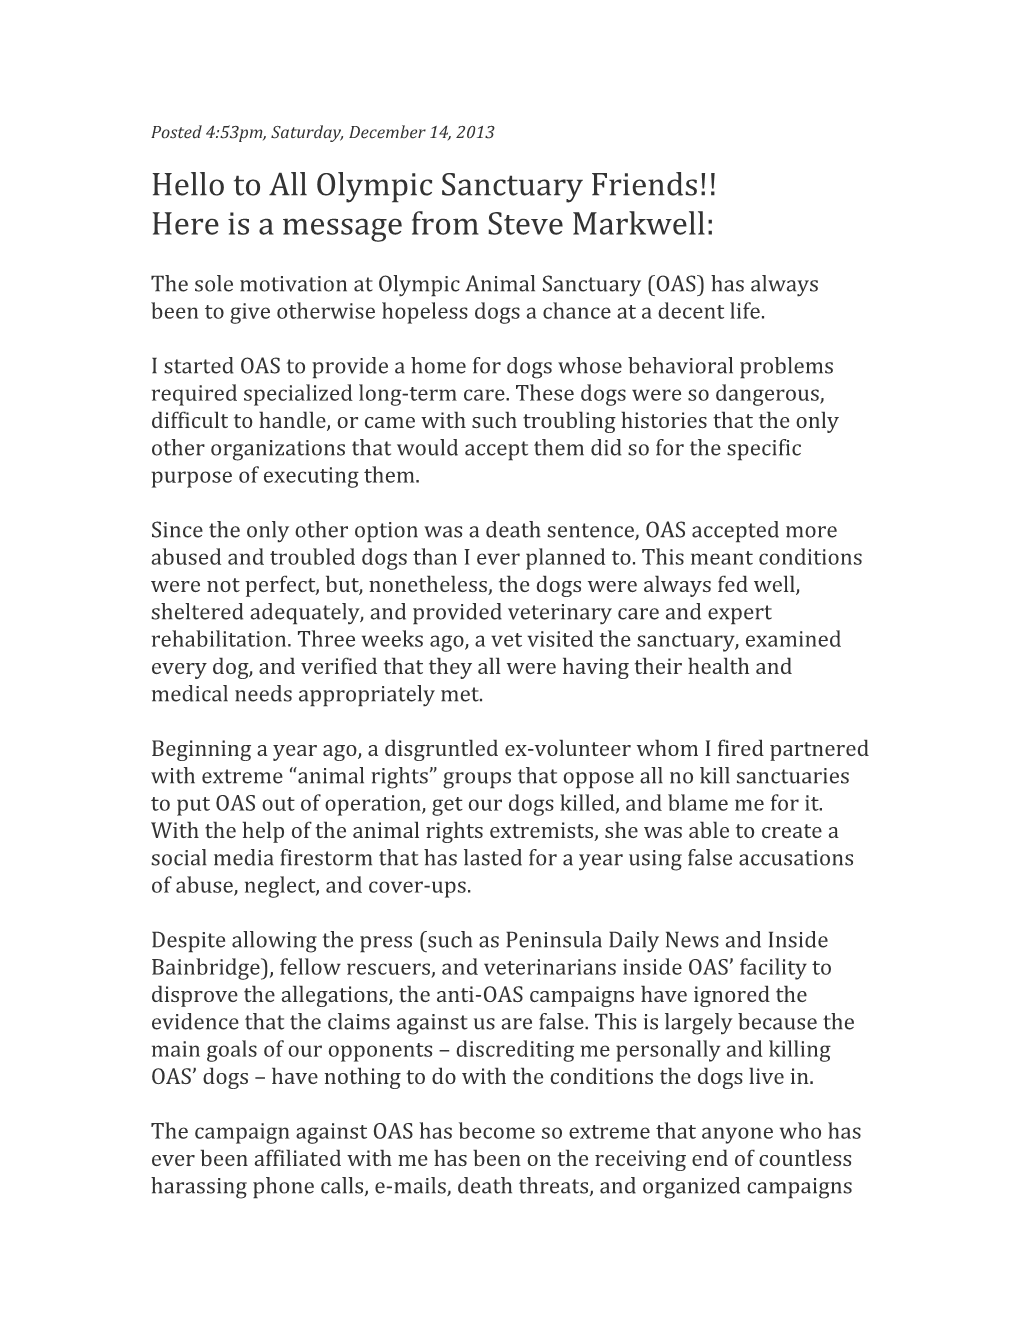 Hello to All Olympic Sanctuary Friends